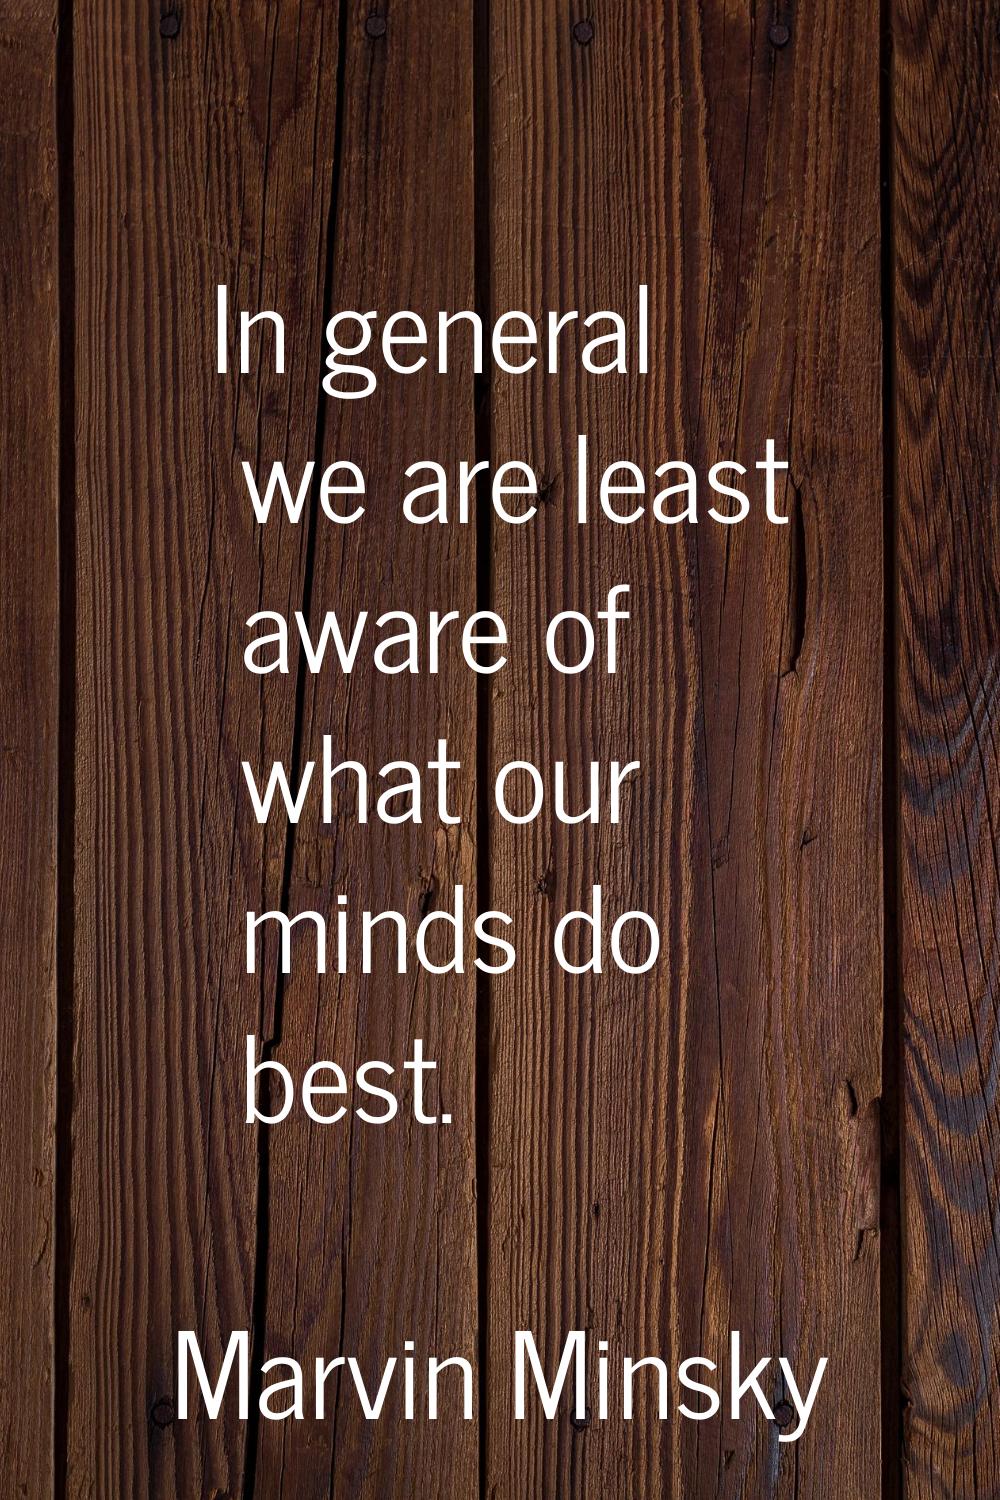 In general we are least aware of what our minds do best.